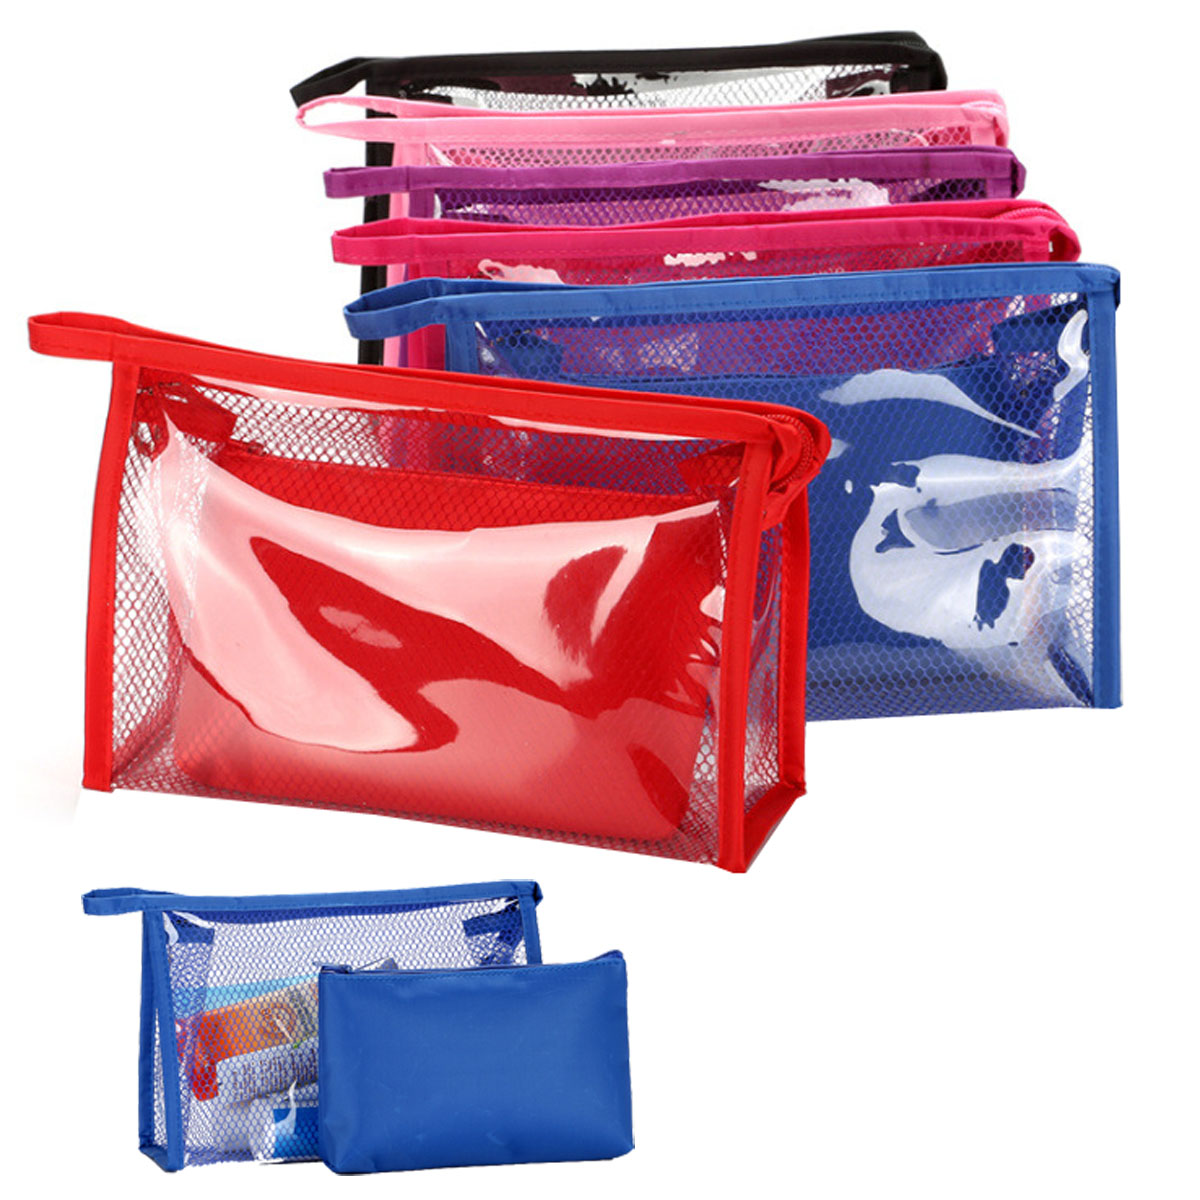 GL-AAD1023 2 in 1 Transparent Cosmetic Bag for Travel